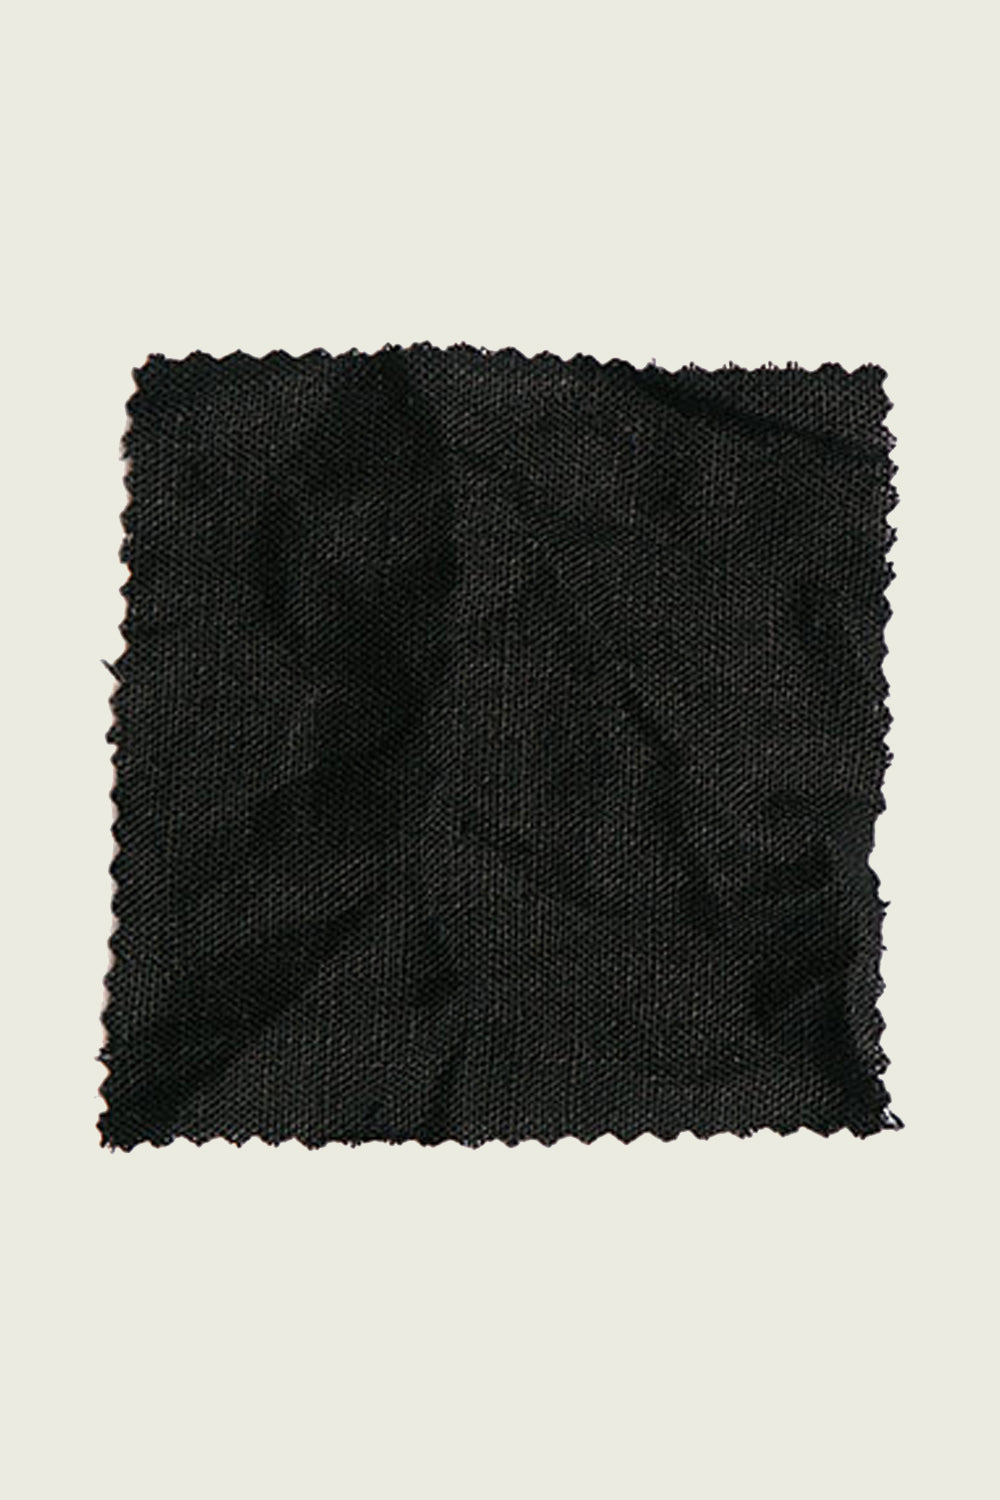 Midweight Linen | Black by the Yard